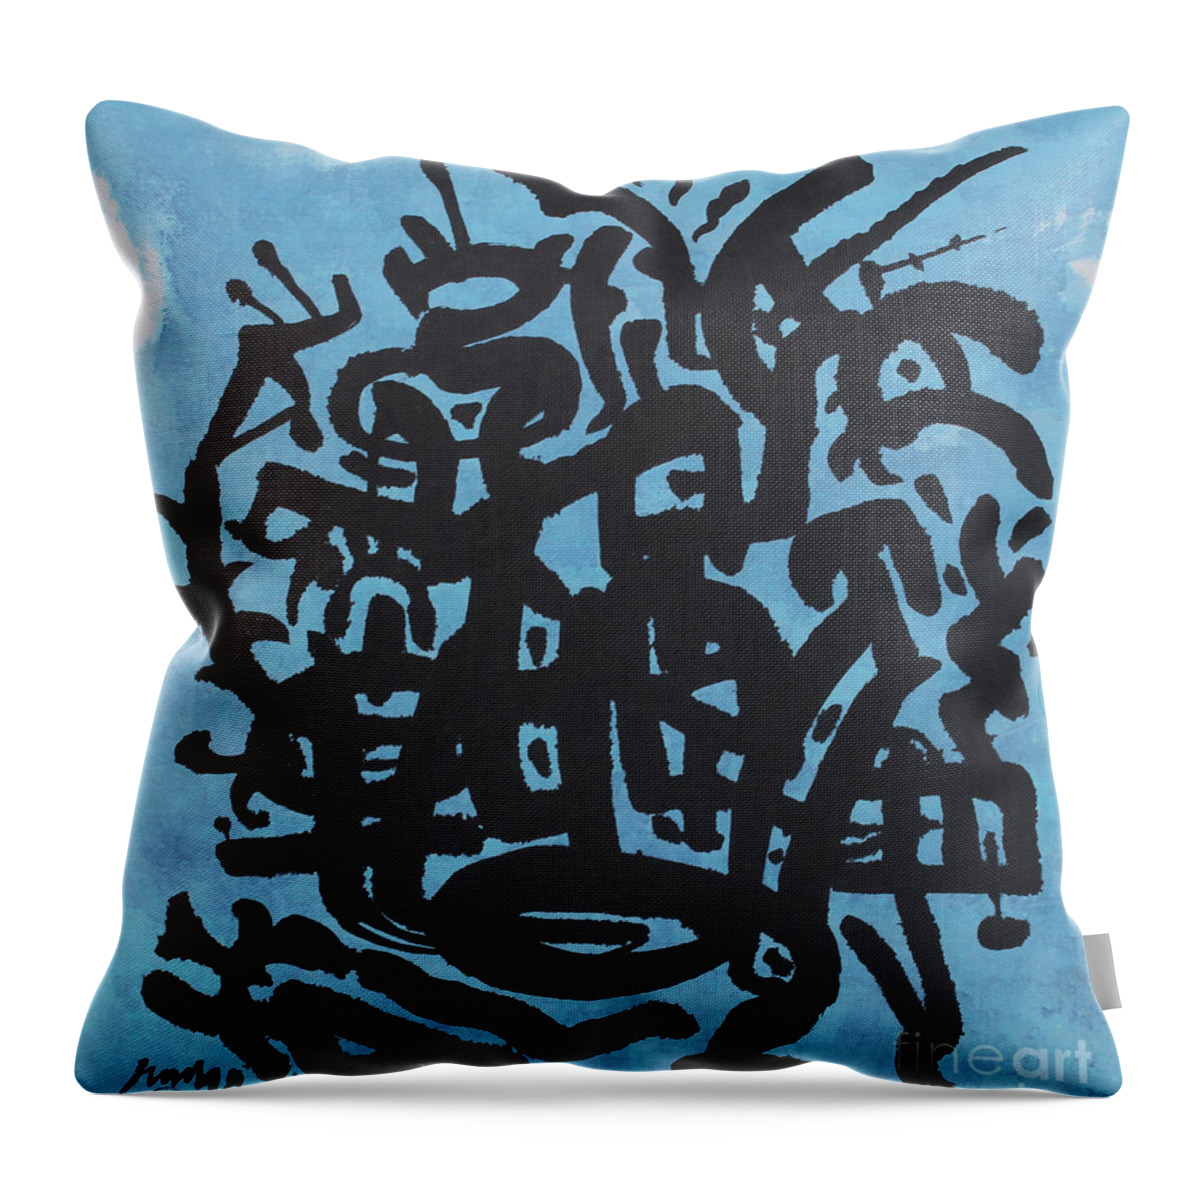 Calligraphic Art Throw Pillow featuring the painting Summer In Vibrant Blue by Nadja Van Ghelue